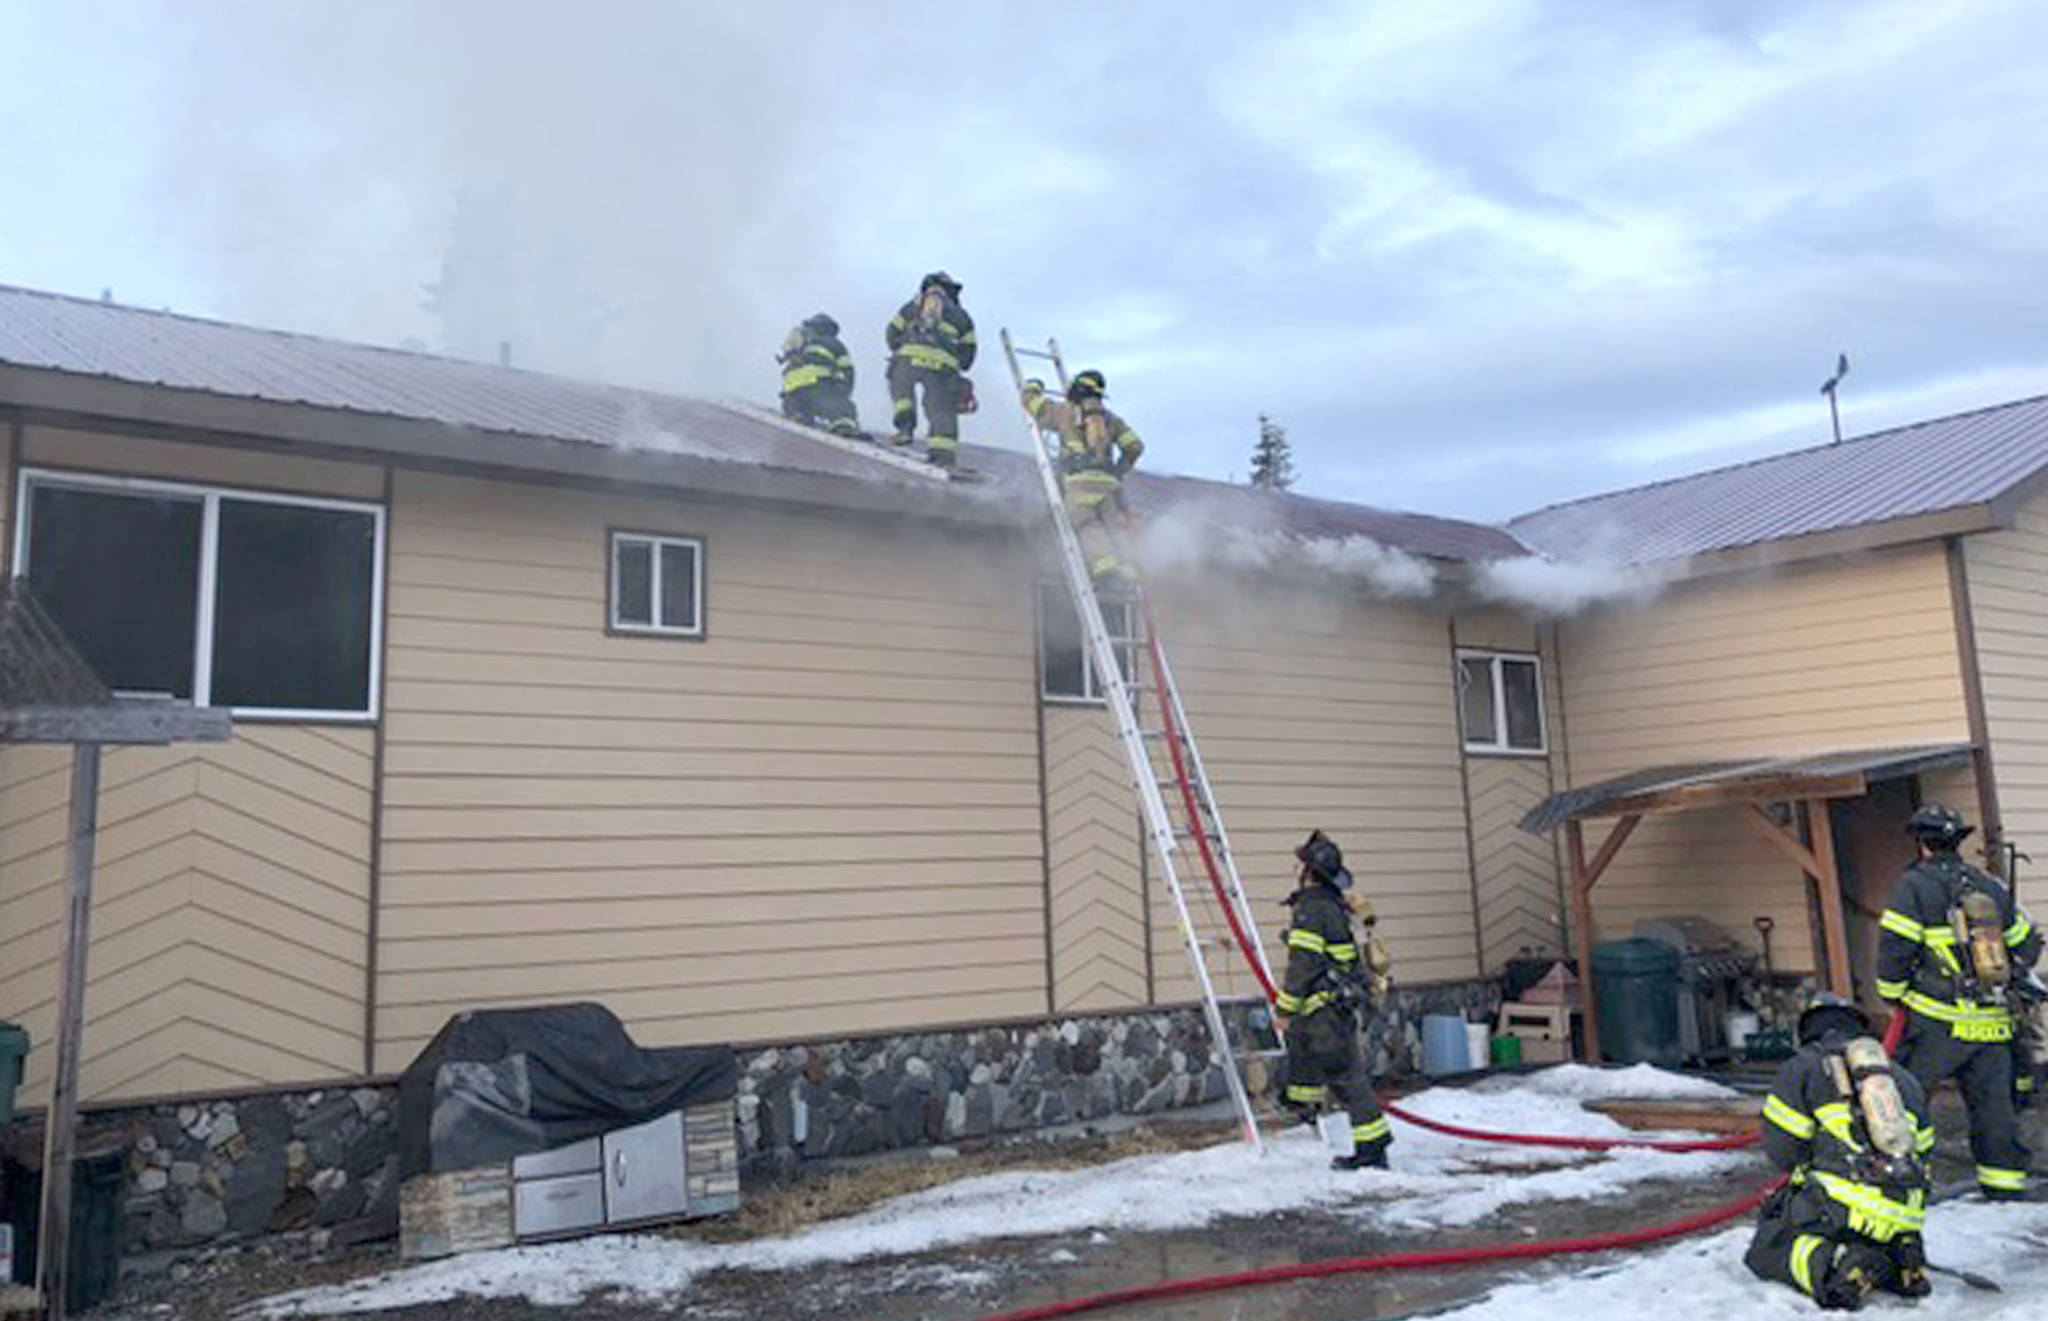 Central Emergency Services firefighters work to extinguish a blaze in an apartment building on Cork Line Drive in the Kalifornsky Beach area on Monday, April 9, 2018 near Kenai, Alaska. No one was reportedly hurt in the blaze, and the cause of the fire is still under investigation. (Photo courtesy Roy Browning/Central Emergency Services)